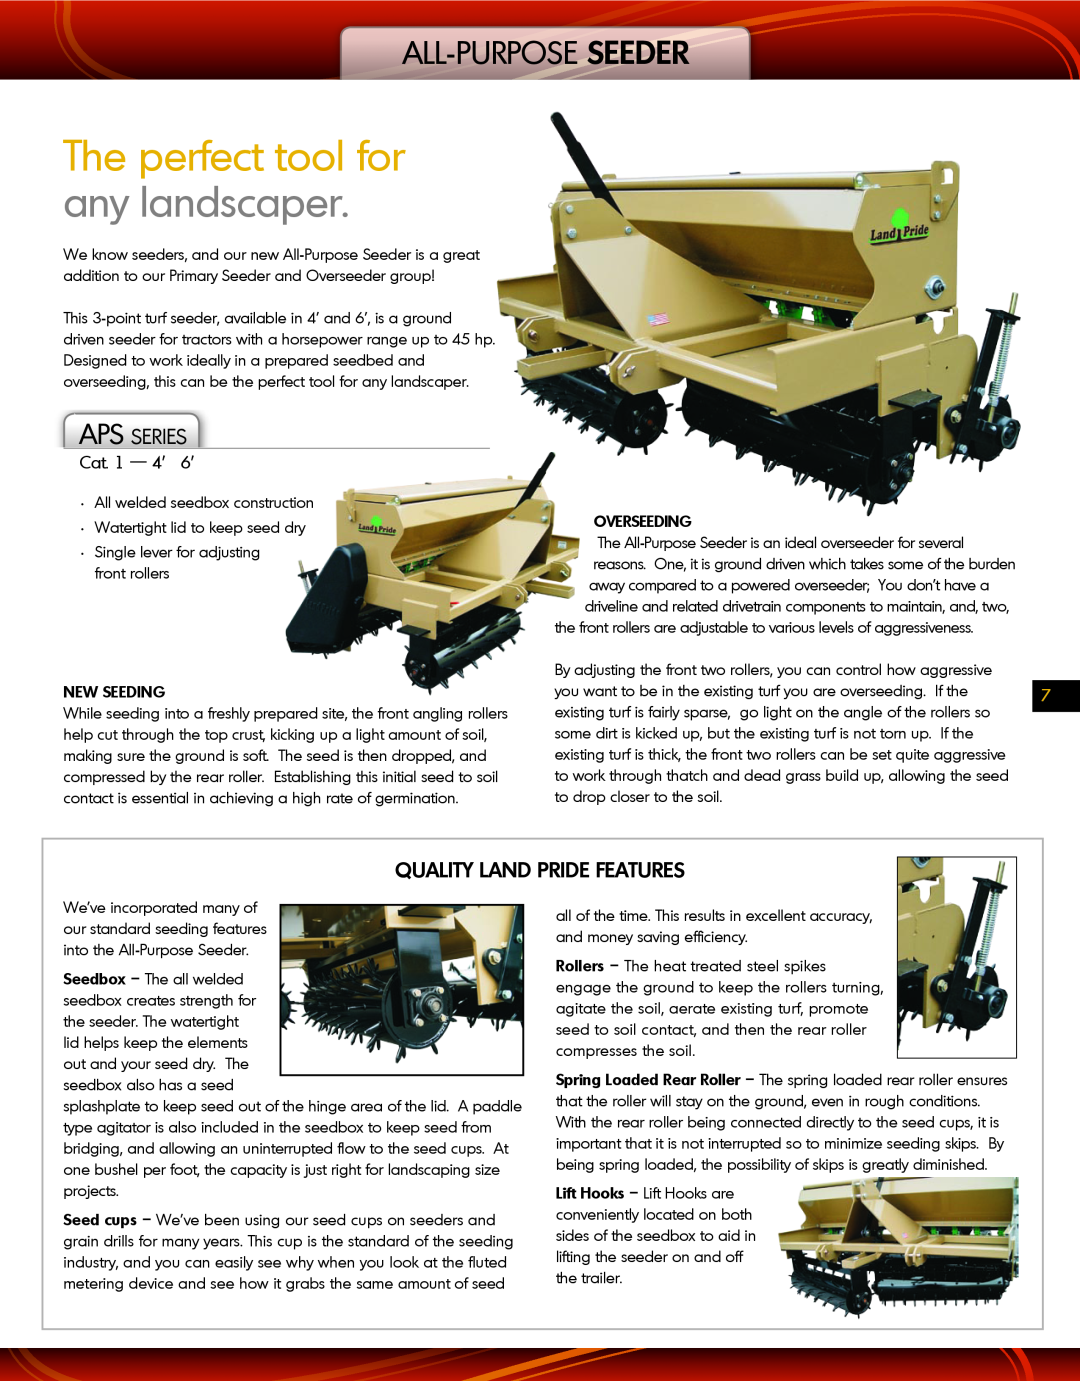 Land Pride APS Series manual The perfect tool for any landscaper, All-Purpose Seeder, Quality Land Pride Features 